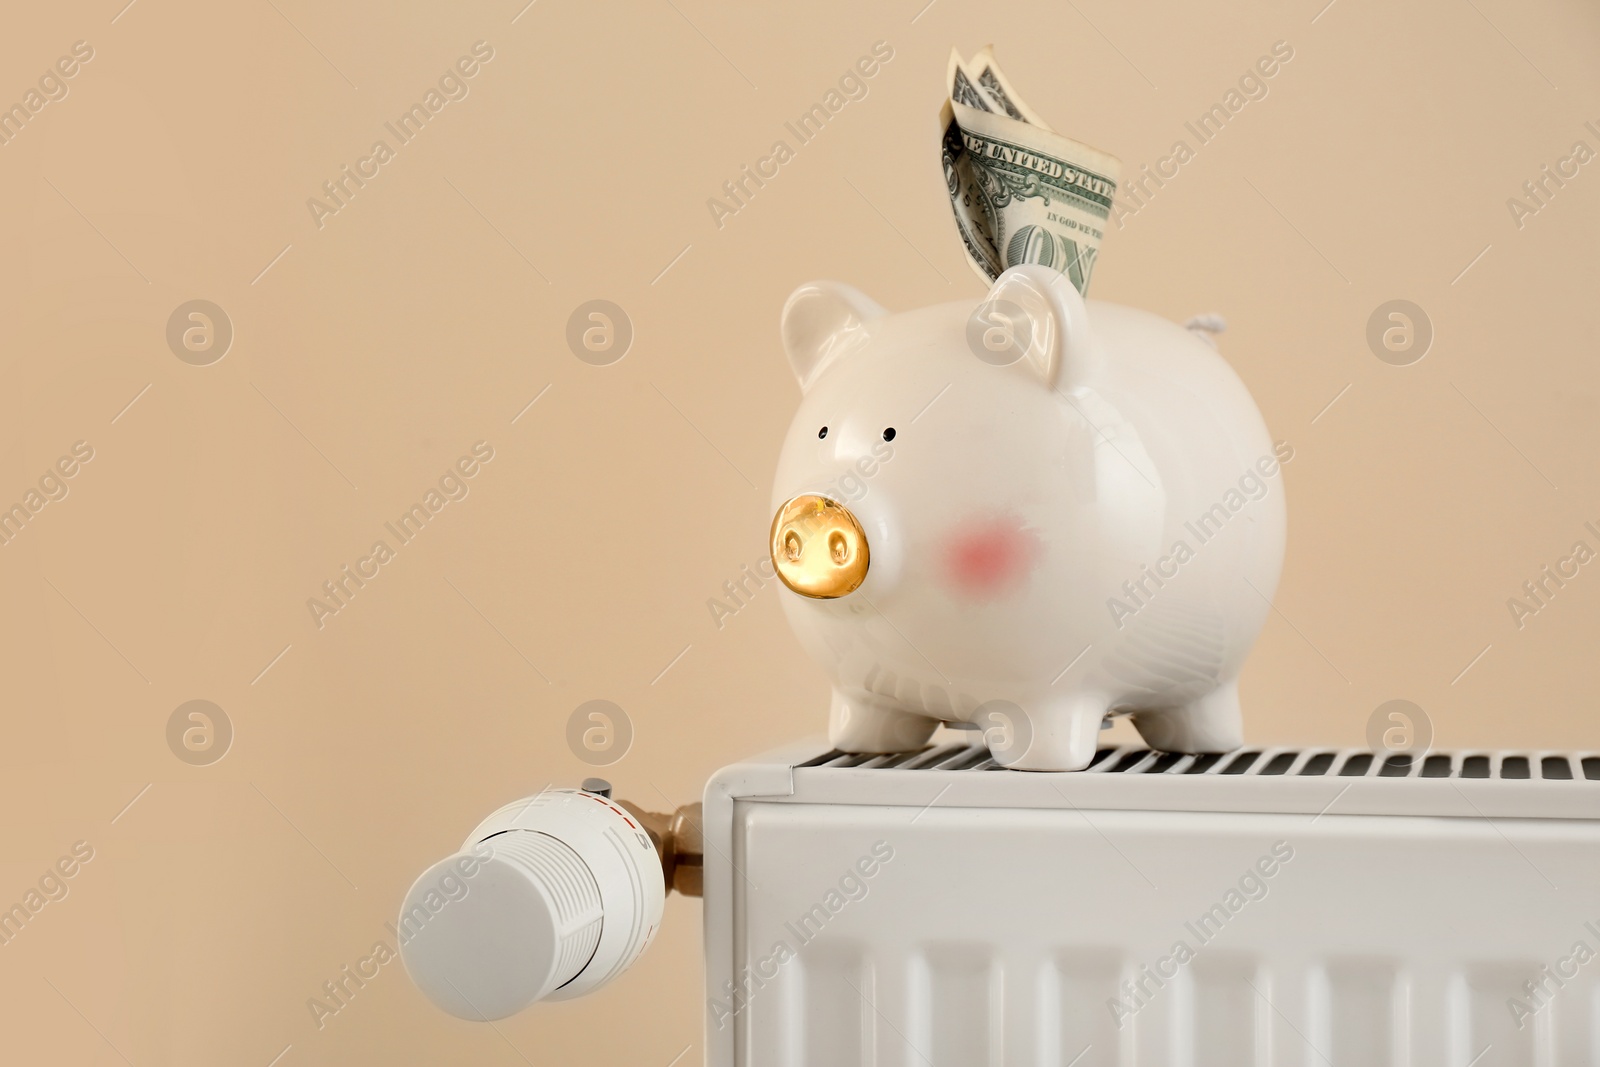 Photo of Piggy bank with money on heating radiator against light background